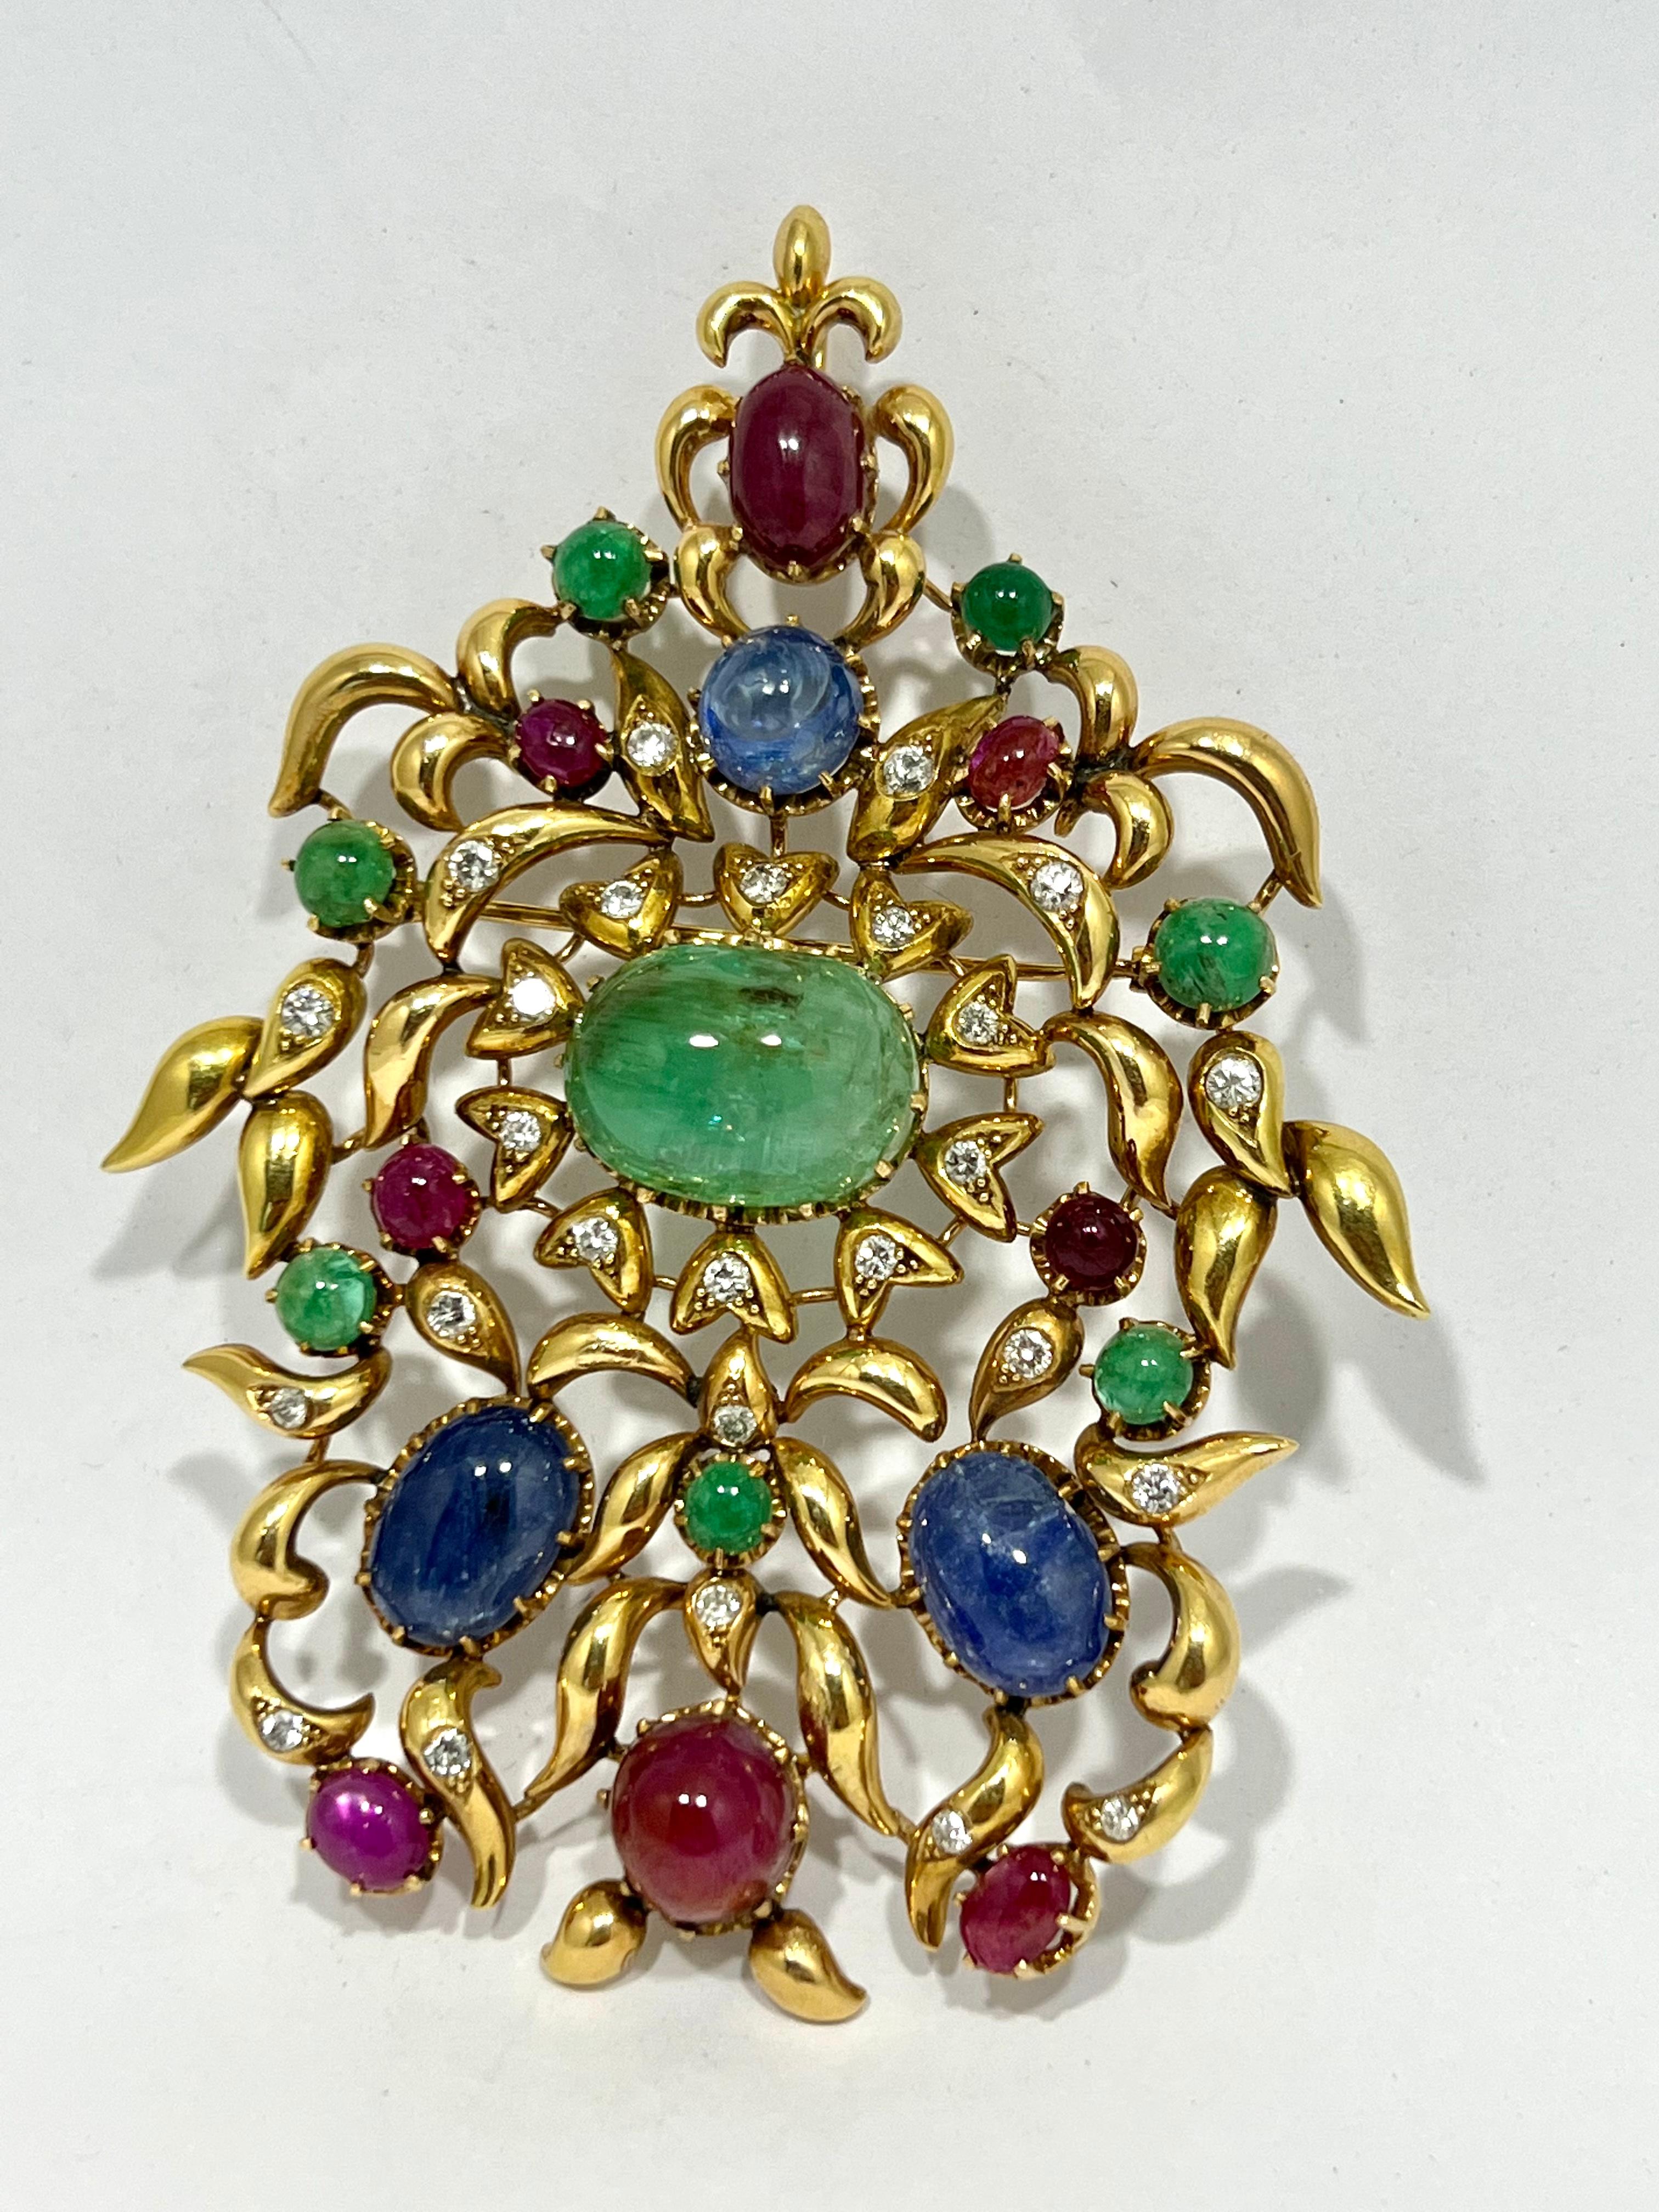 1960´s Bouquet Brooche & pendant in 18k Gold Emerald Ruby & Sapphire Cabochons
All natural gems
Emeralds 8 cabouchon total 10cts
Sapphires 3 cabouchon total 7 cts
Rubies 8 cabouchon total 6cts 
Diamonds brilliant cut 1.50cts 

MATERIALS
◘ Weight 65